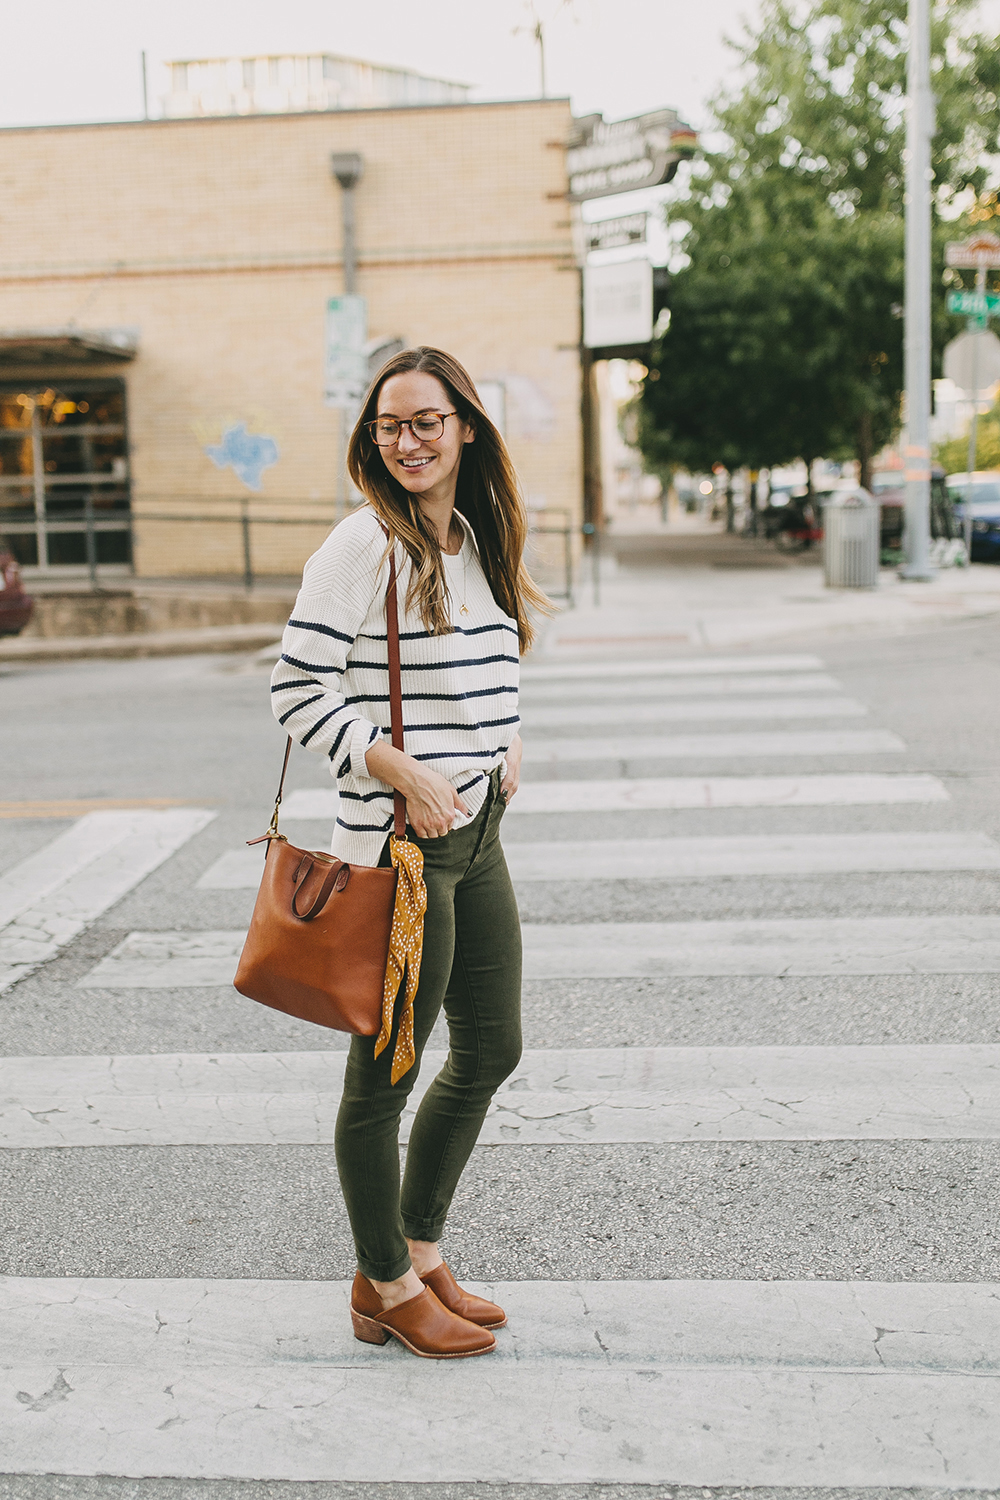 livvyland-blog-olivia-watson-austin-texas-fashion-lifestyle-blogger-madewell-olive-skinny-jeans-striped-sweater-trunk-club-review-2